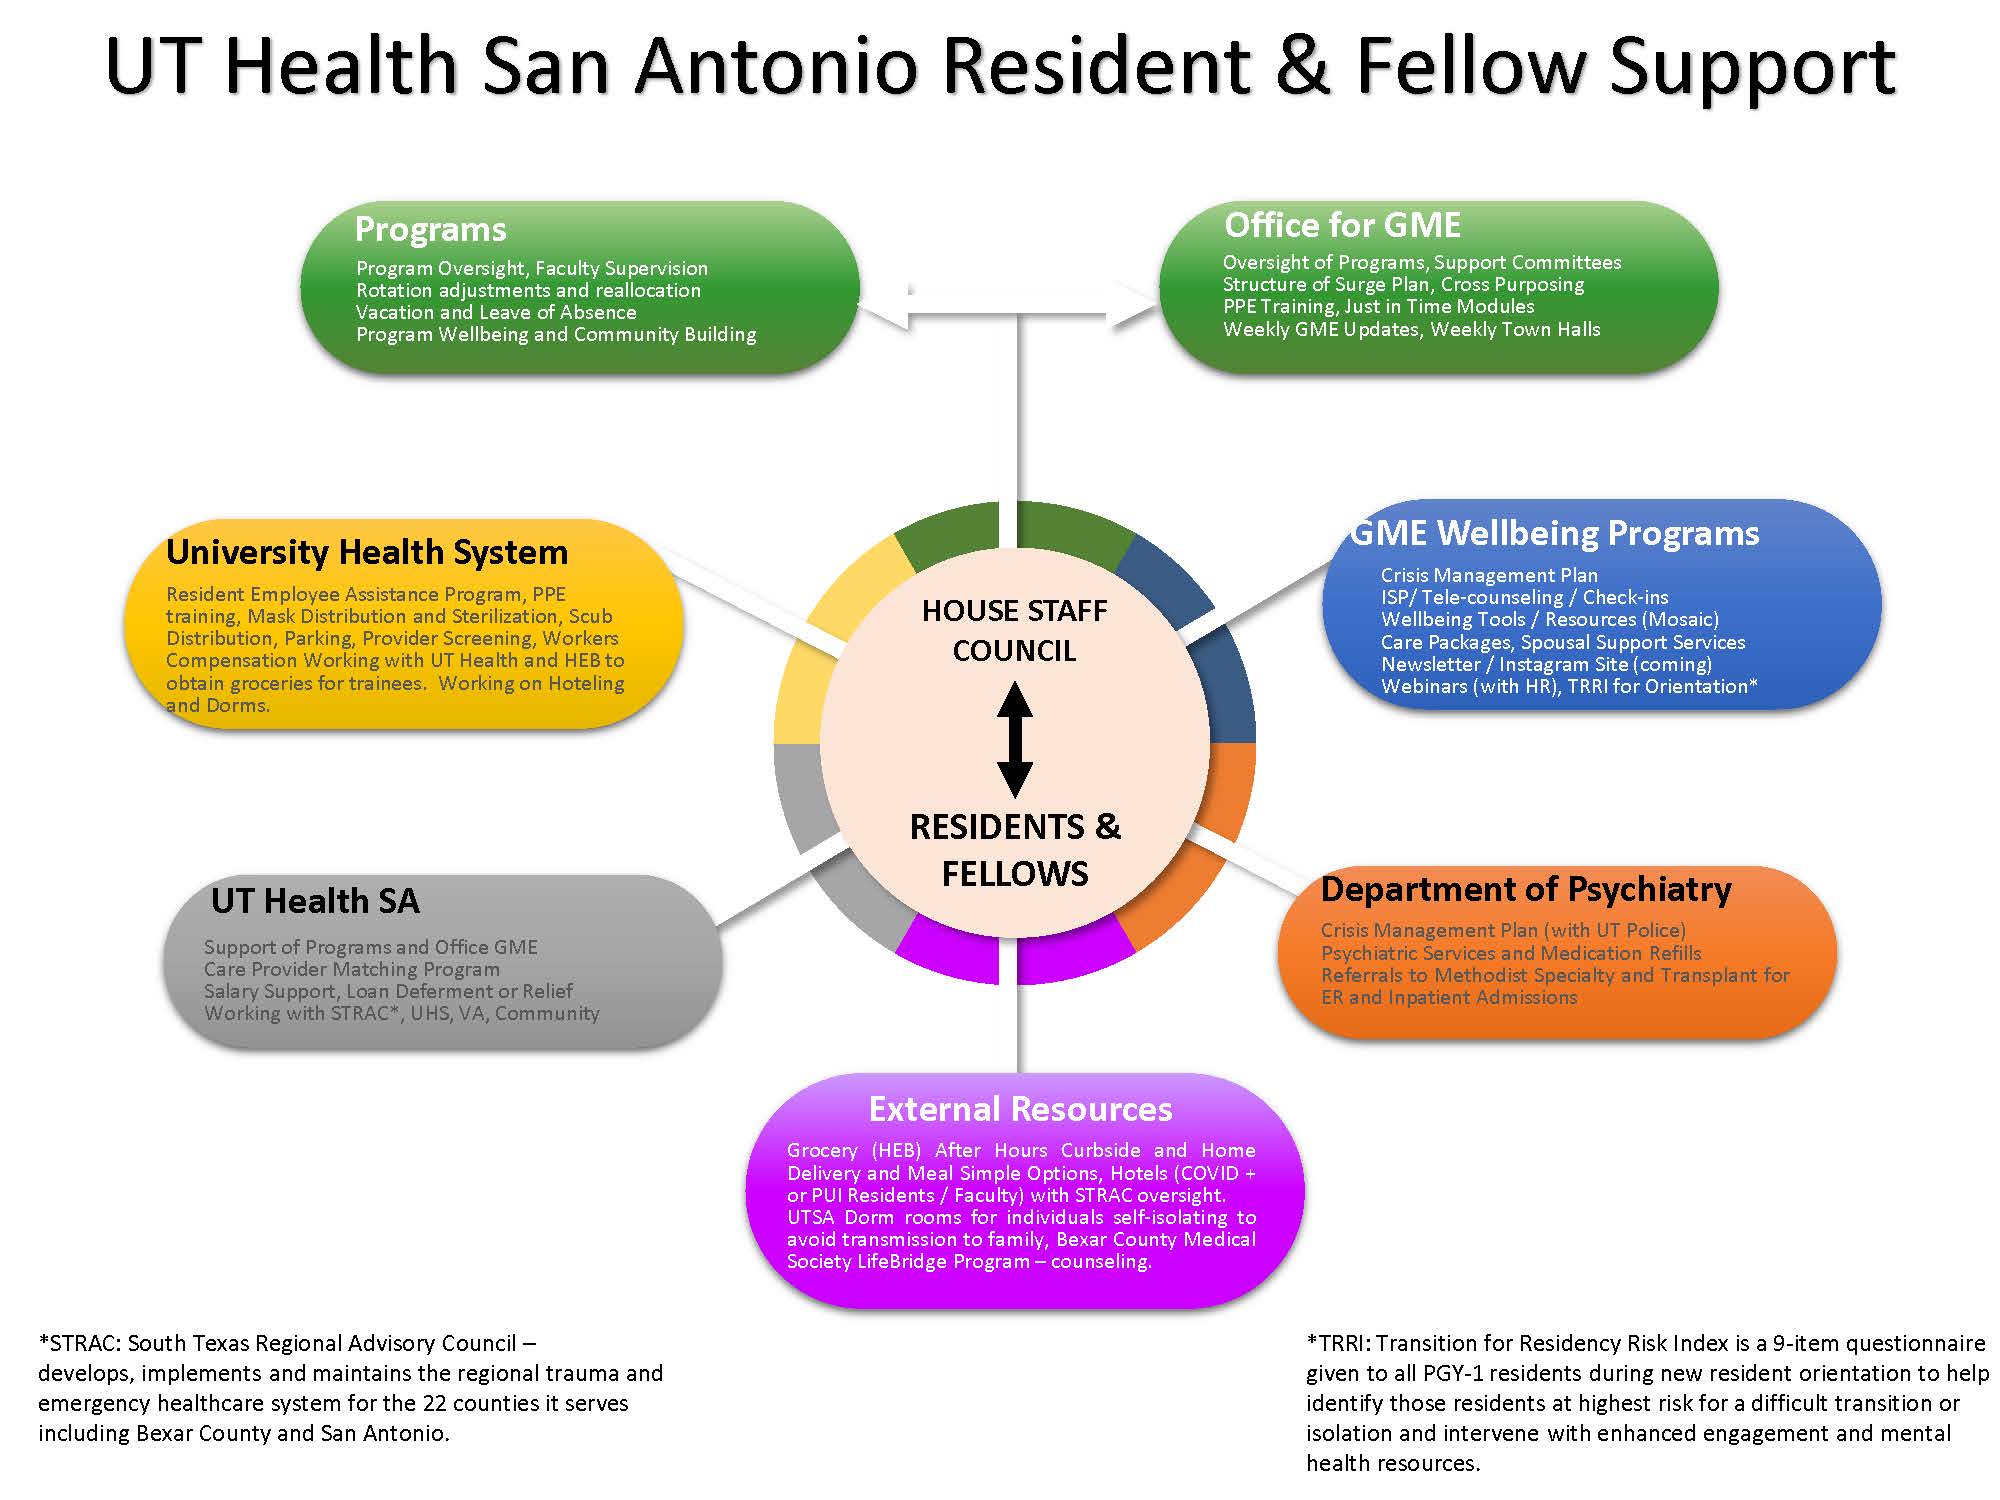 A graphic showing how the House Staff Council represents residents and fellows by supporting them with programs and resources offered by UT Health San Antonio, University Health System, and external services.